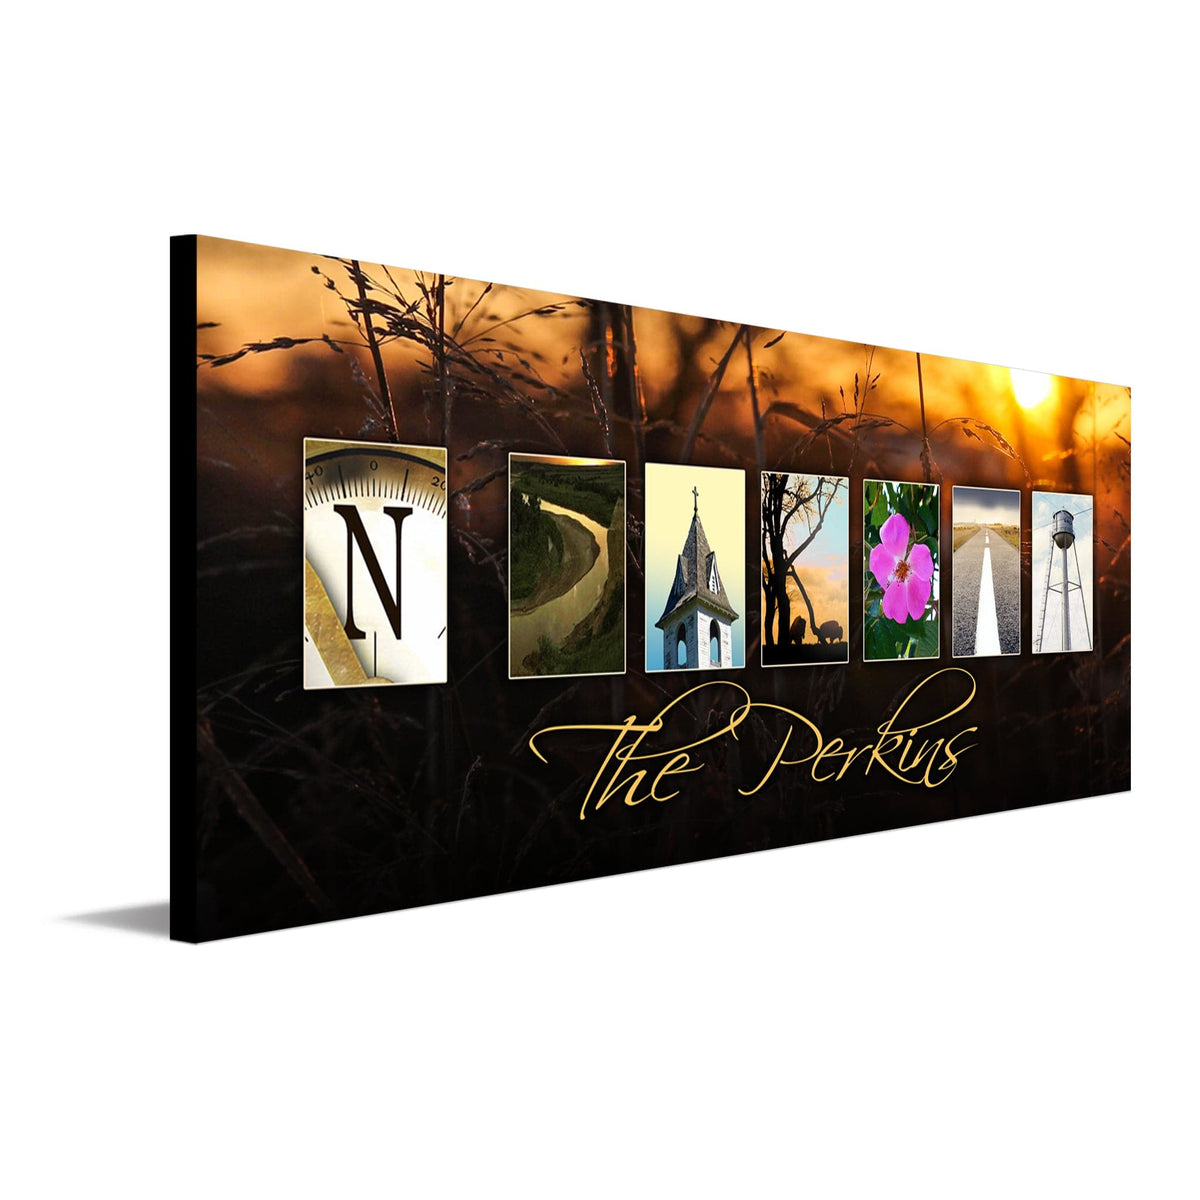 Personalized North Dakota wall art using images from the state to spell the words North Dakota - Personal-Prints